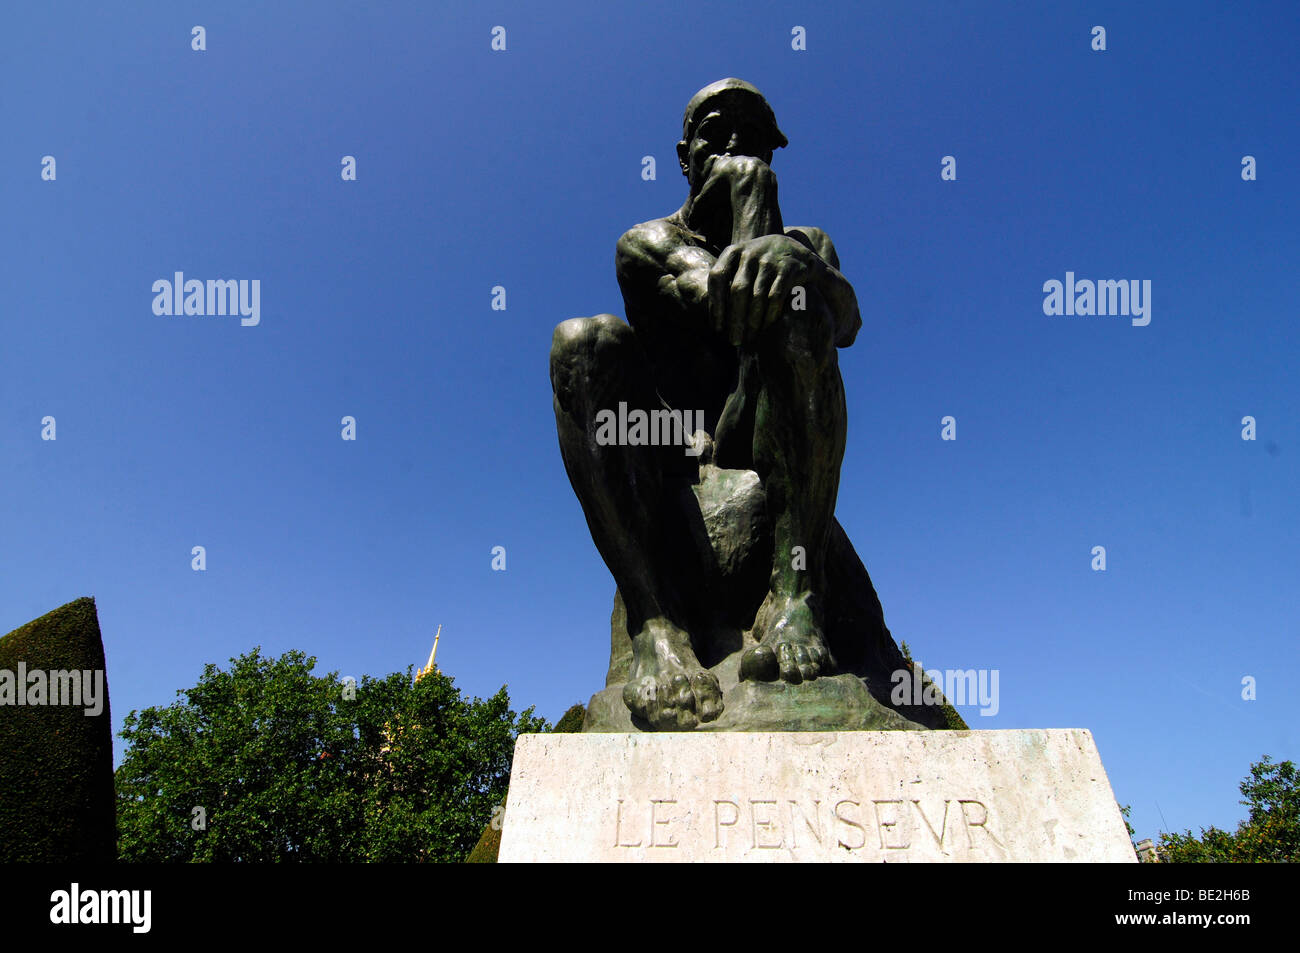 Le Penseur ('the thinker') is Auguste Rodin's masterwork sculpture; on display at the Rodin museum garden in Paris, France. Stock Photo